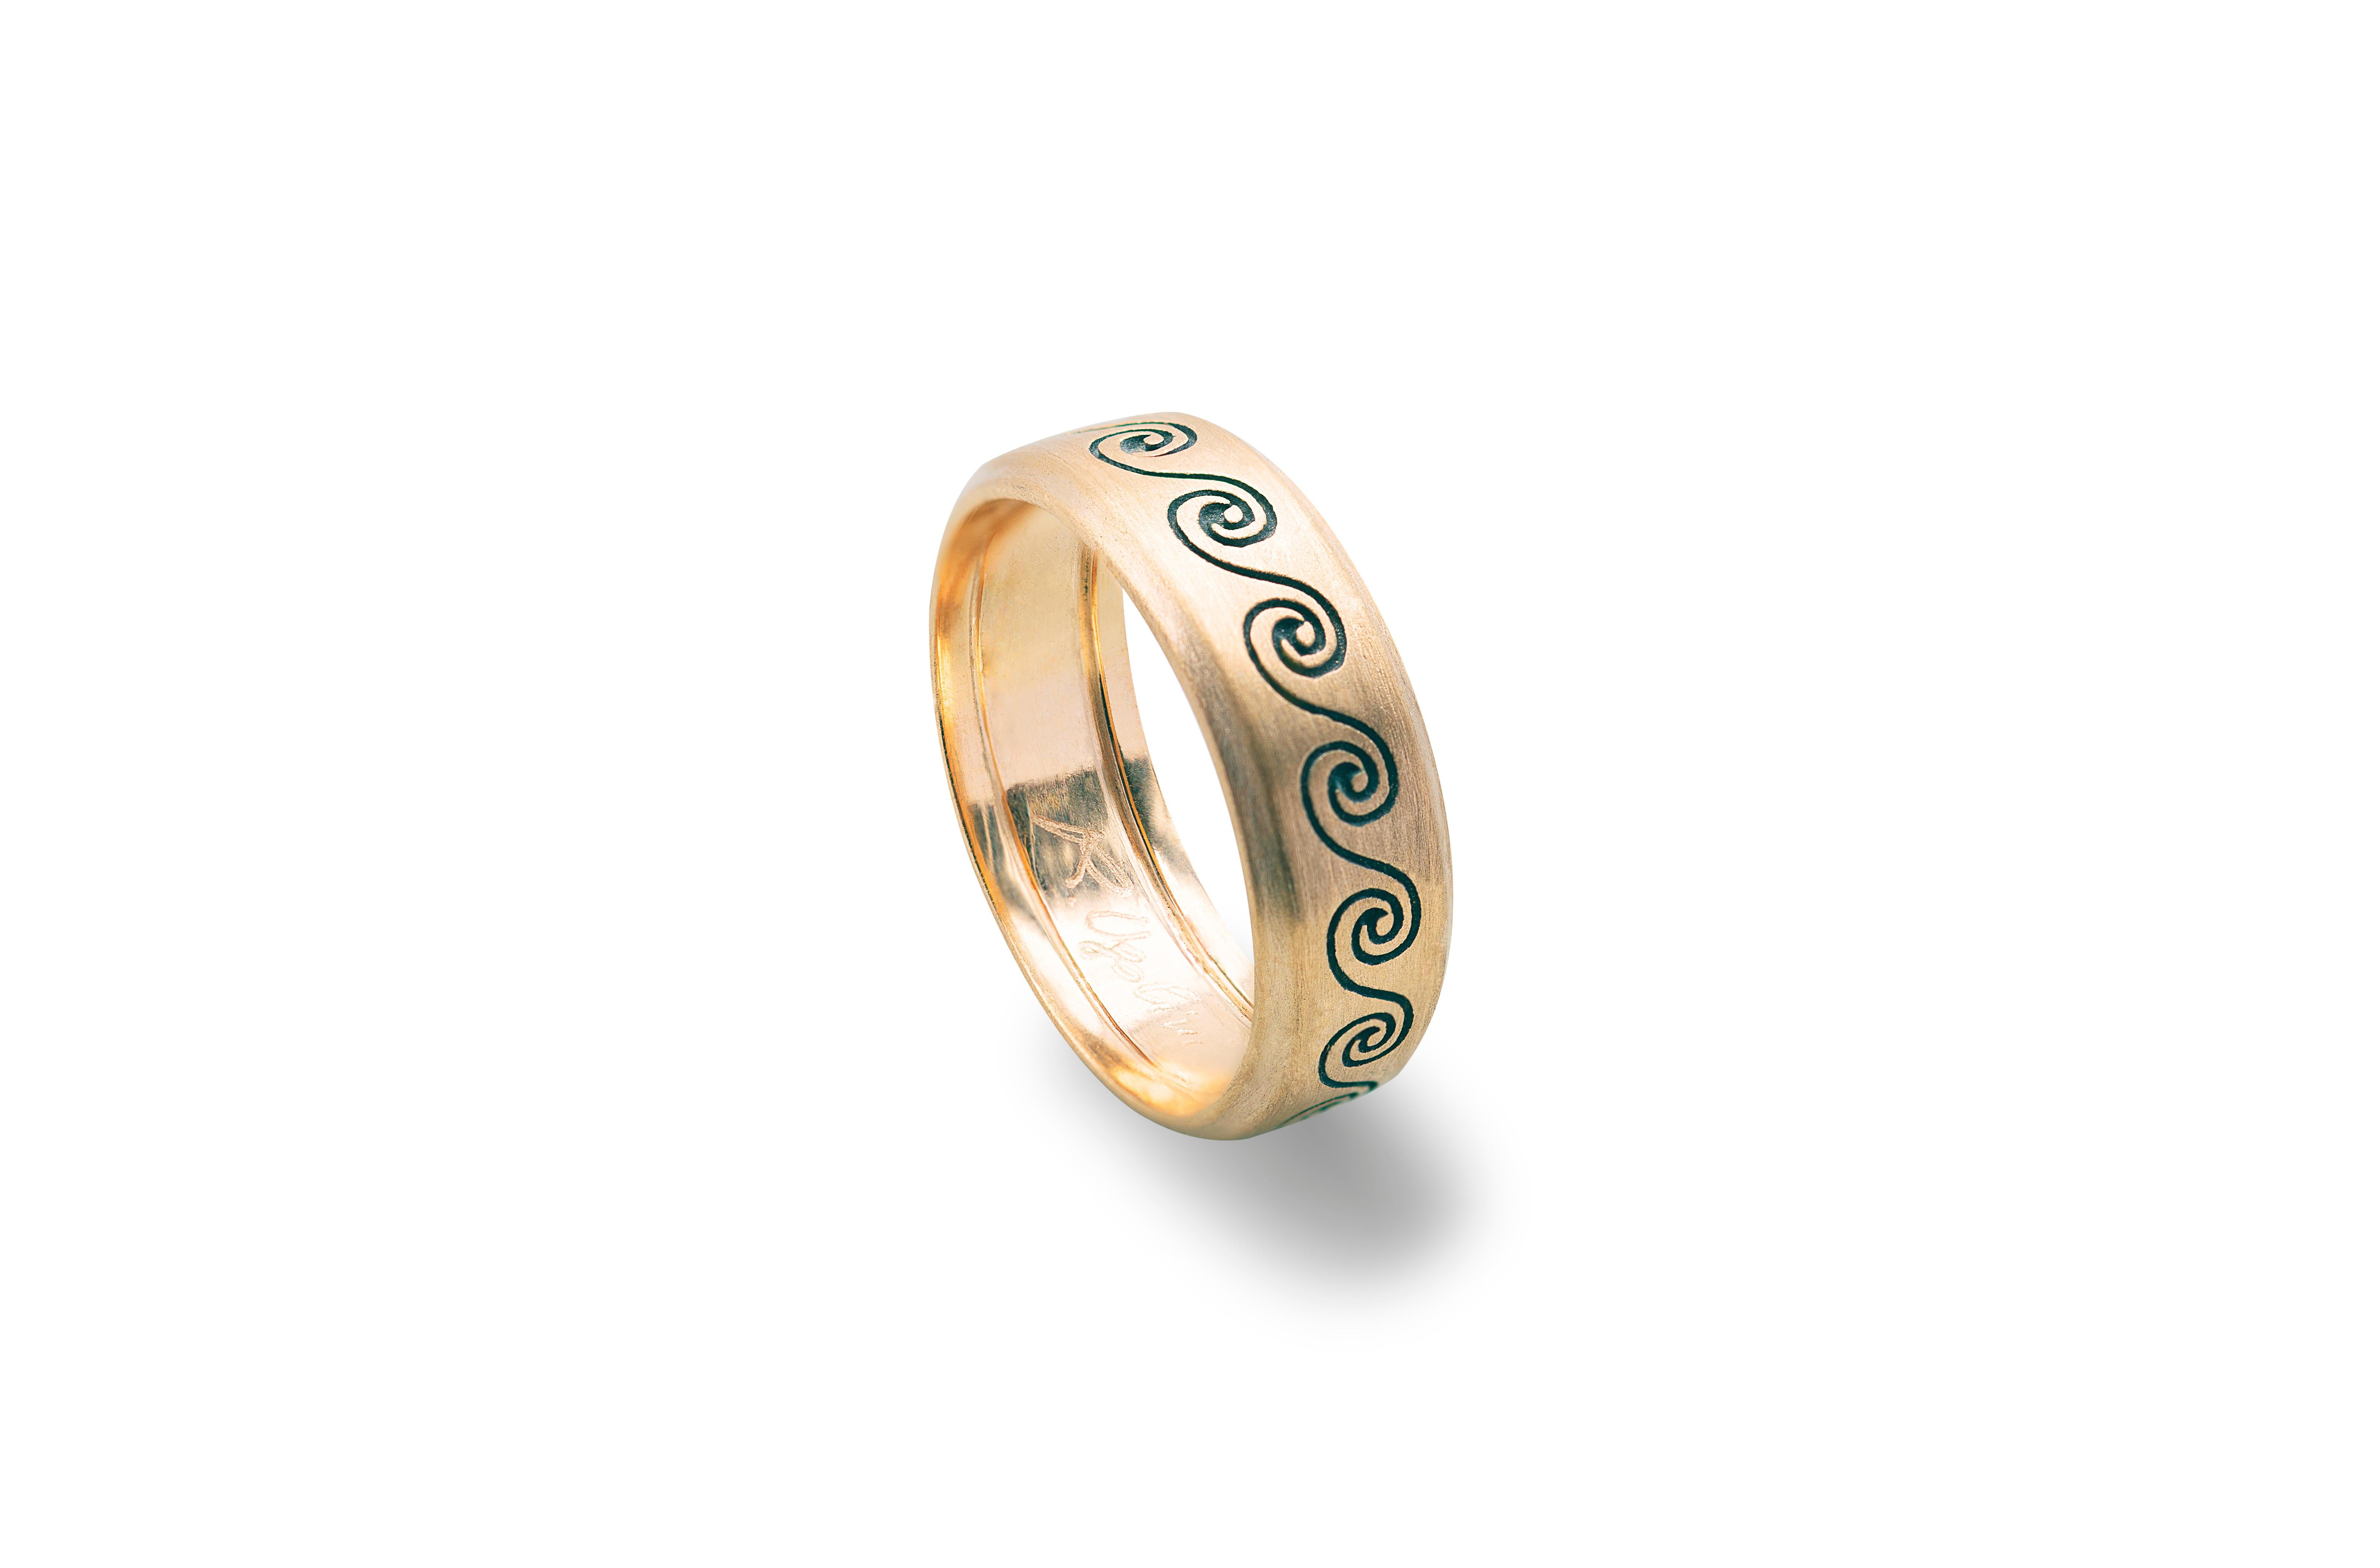 Handcrafted Rossella Ugolini Satin 18Karats Yellow Gold Wave Unisex Design Ring 
Here there is an amazing design ring, handcrafted in 18 karats yellow gold and embellished with a beautiful handgraved wave.
It can be worn for different purposes: as